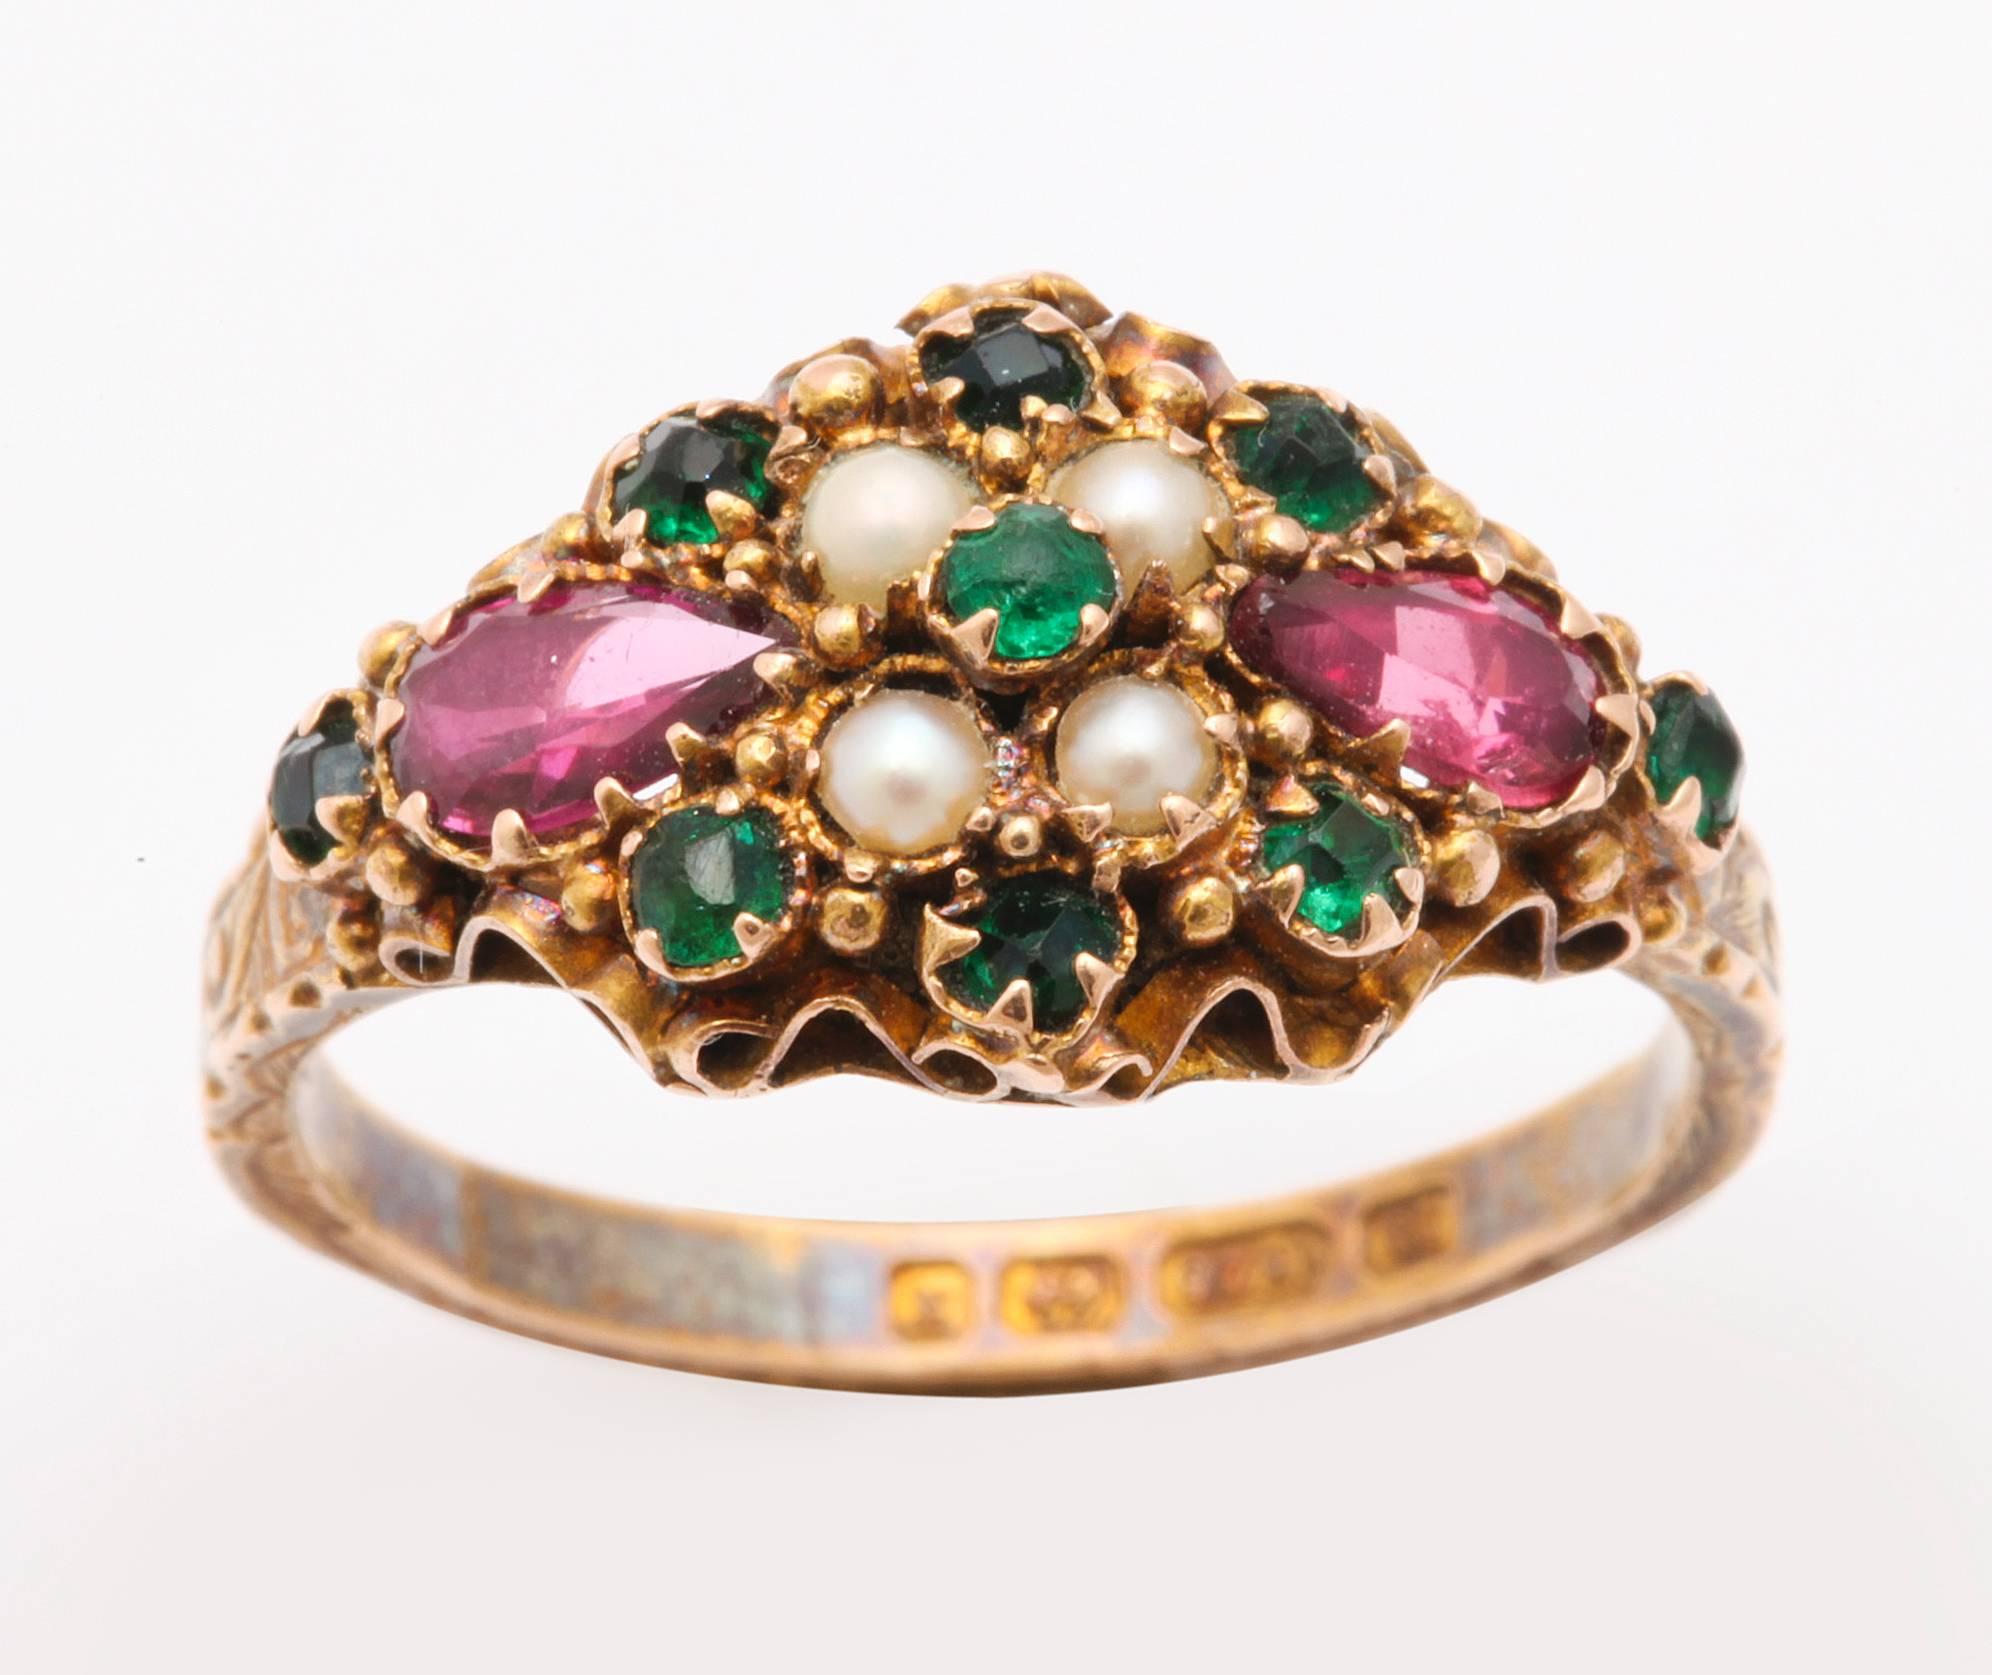 A delicious ruby, emerald and pearl ring with a marvelous 15 kt gold setting pulls no punches with beauty or symbolism. The colors of the gems , emerald, white and violet signify 